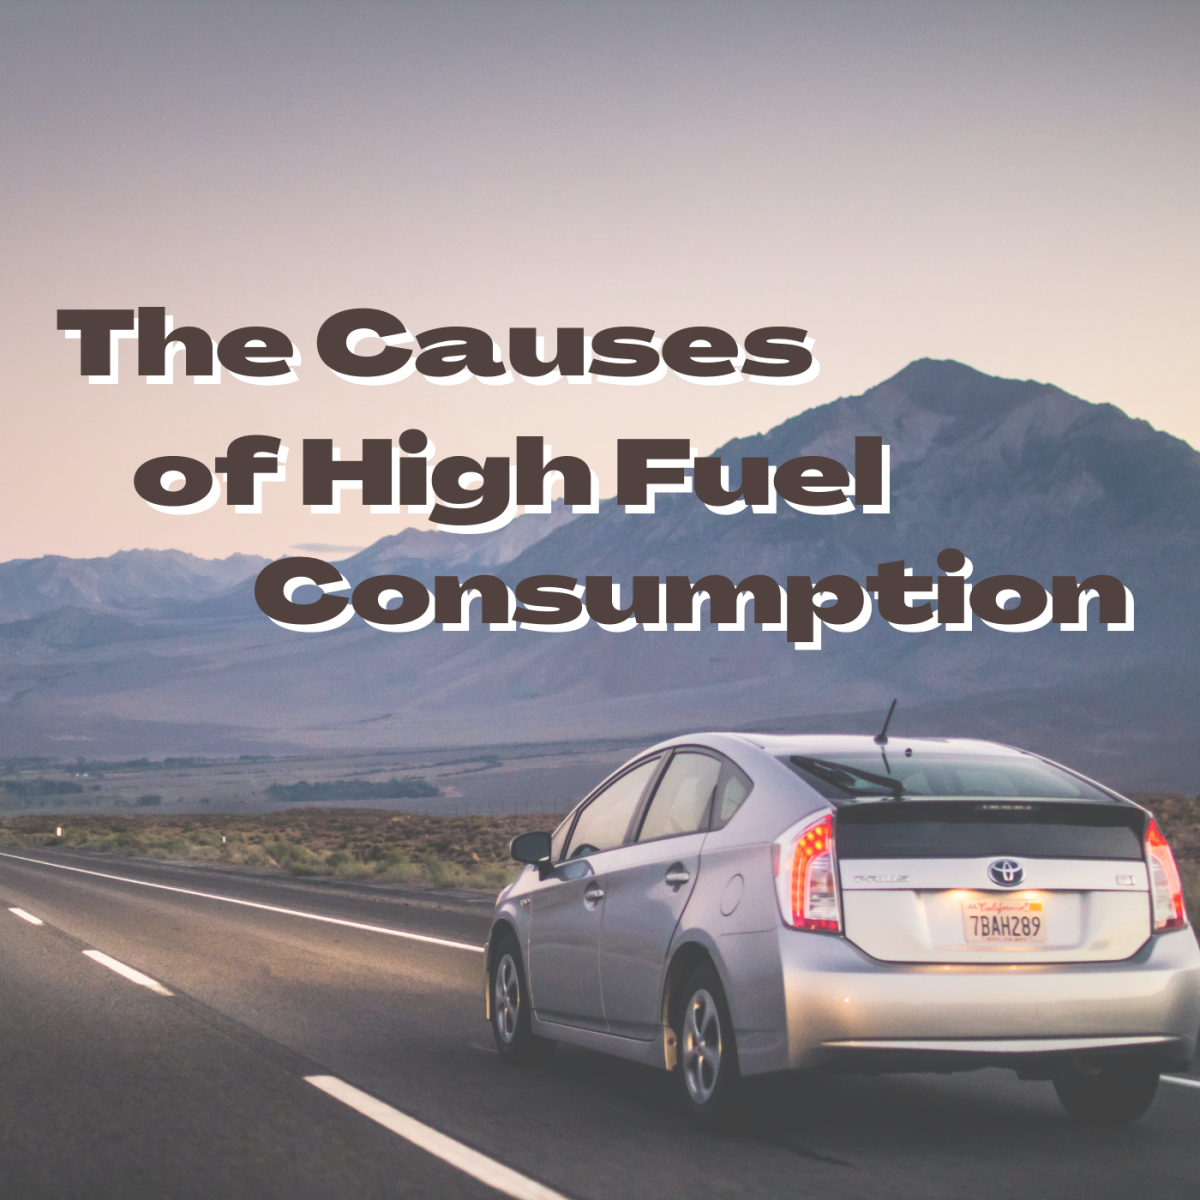 What Causes High Fuel Consumption?